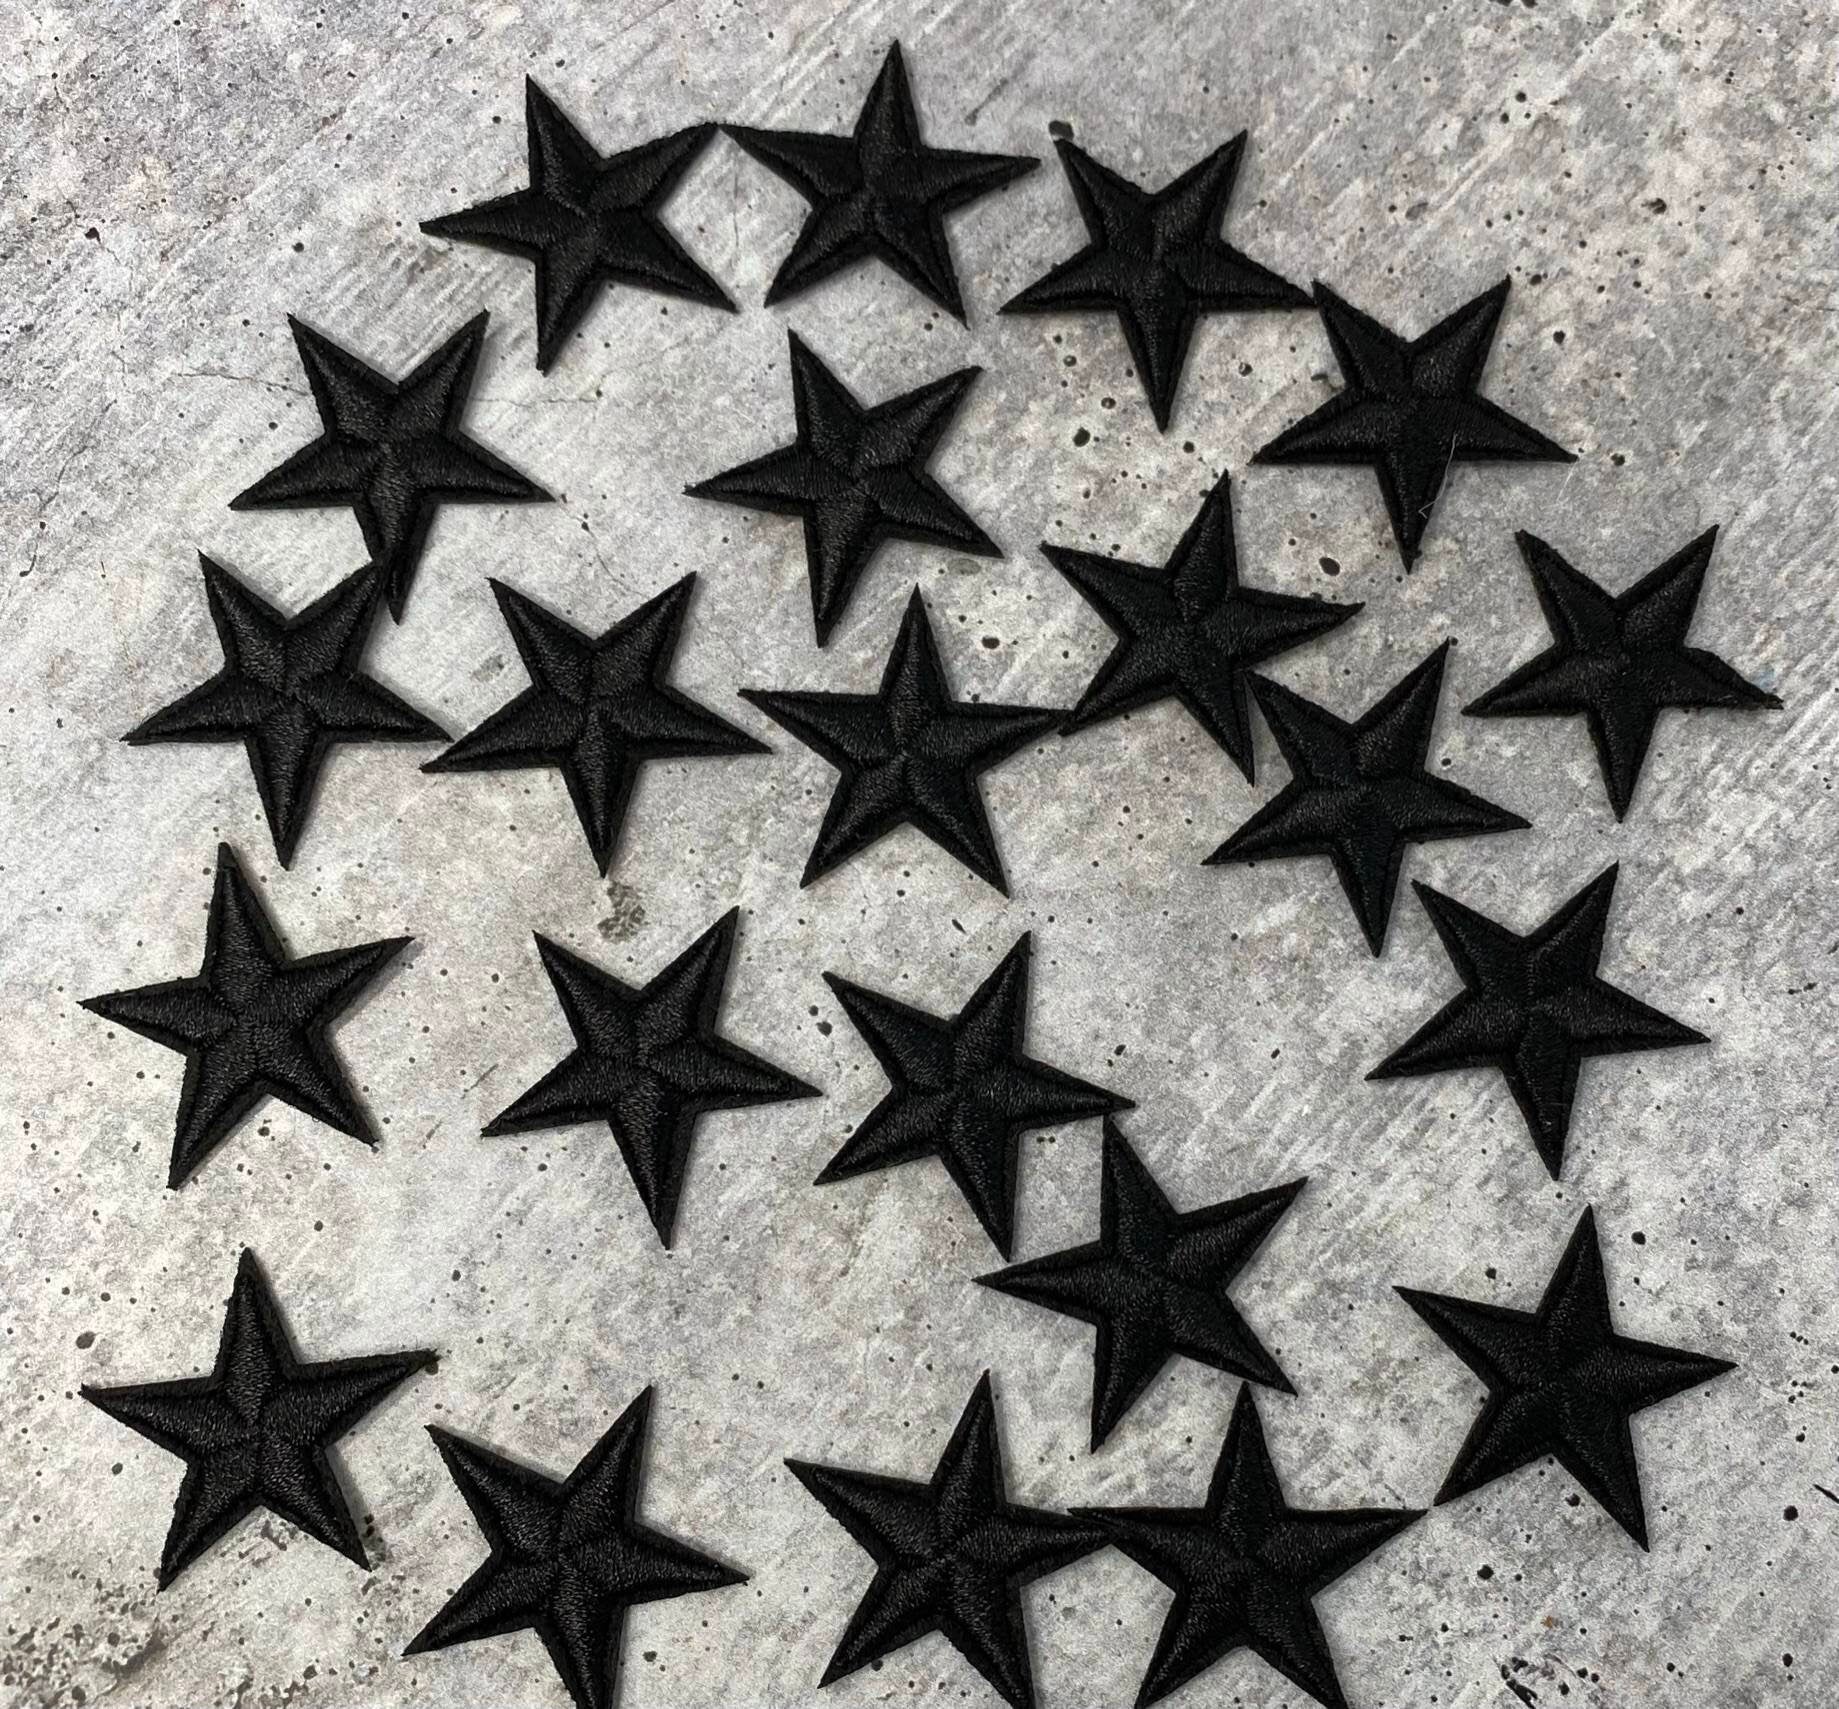 2pc/Mini BLACK Star Applique Set, Star Patch, 1" inch Small Stars, Cool Applique, Iron-on Embroidered Patch, Patches for Clothes